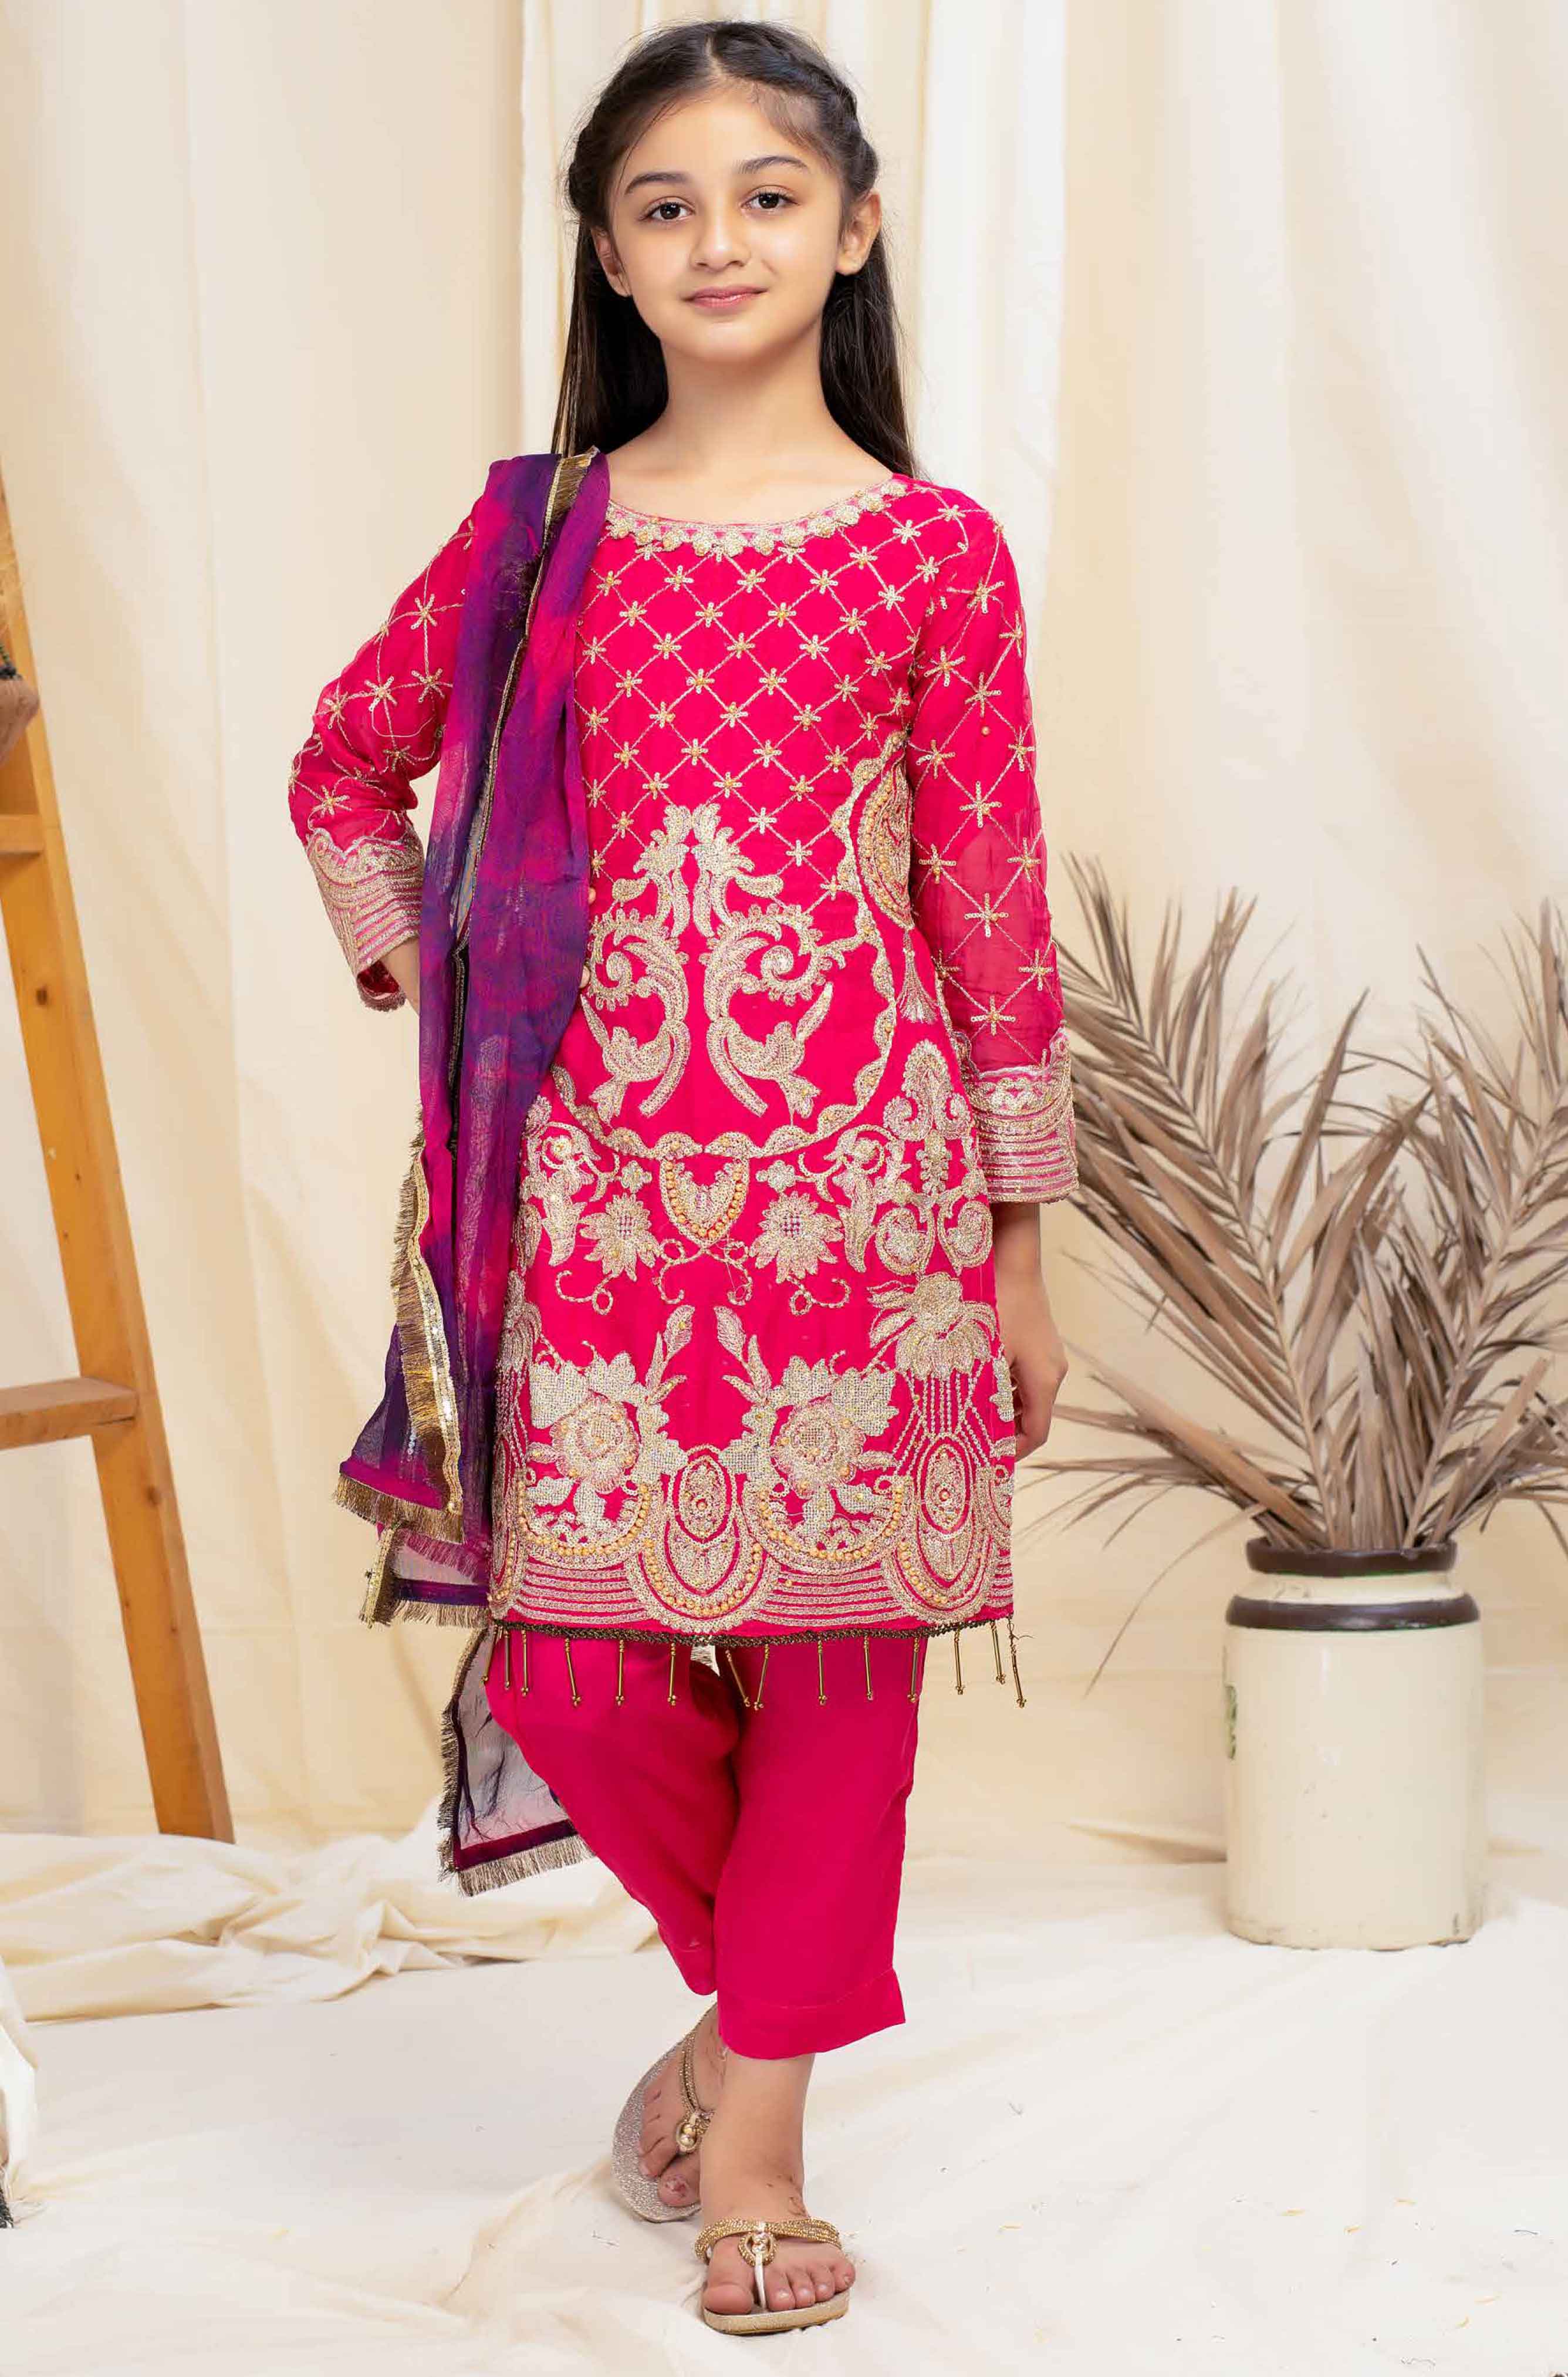 Simrans Semi Formal Kids Pink Outfit With Contrasting Green Dupatta